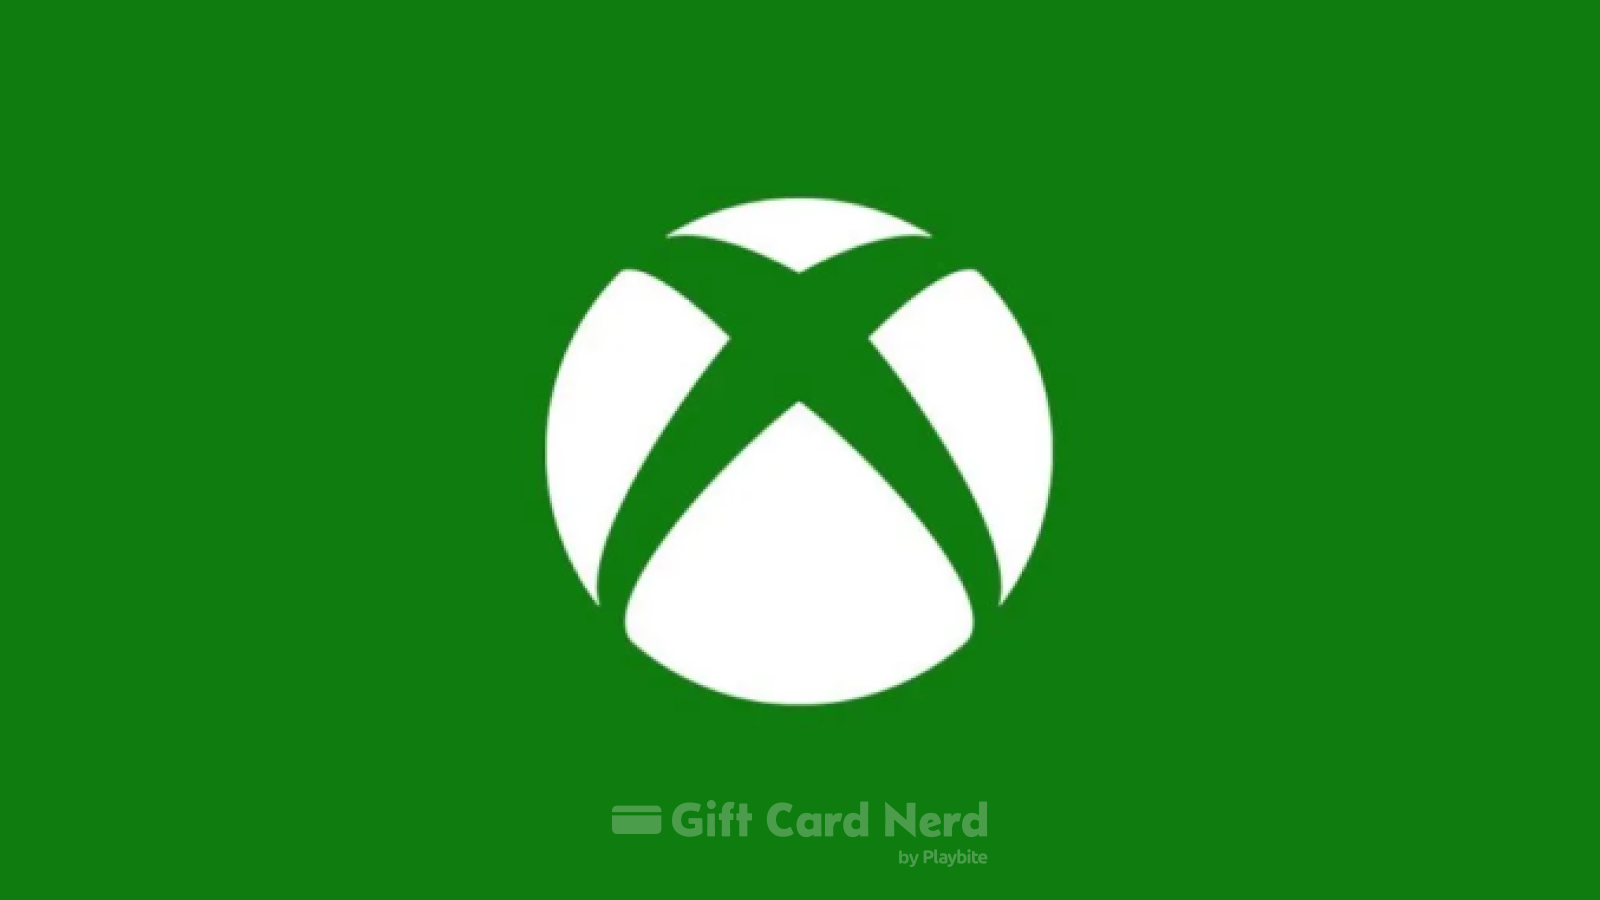 Does Amazon Sell Xbox Gift Cards?